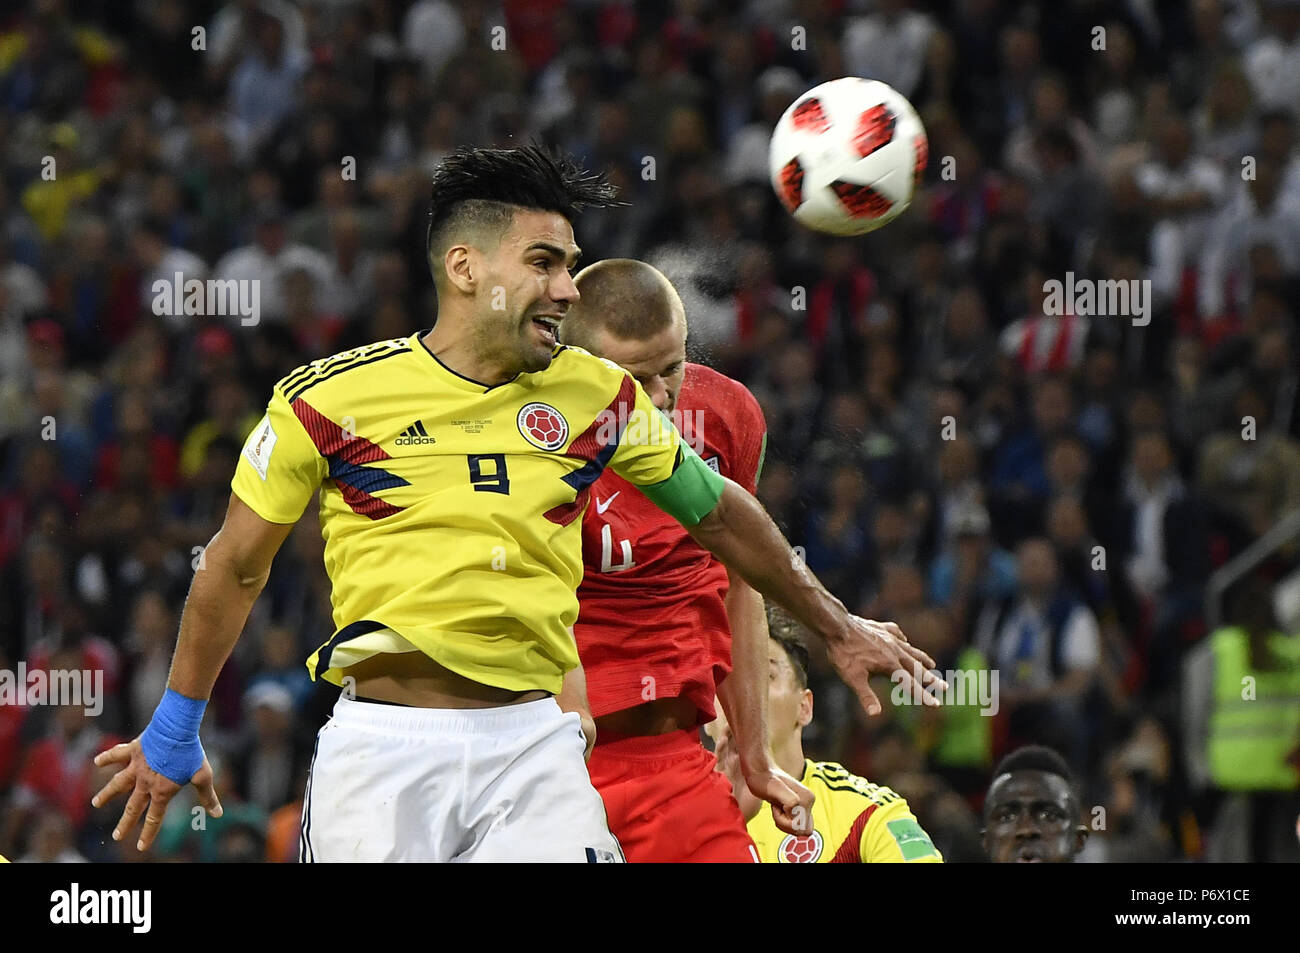 Moscow, Russia. 3rd July, 2018. Eric Dier (R) of England vies with Radamel Falcao of Colombia during the 2018 FIFA World Cup round of 16 match between England and Colombia in Moscow, Russia, July 3, 2018. England won 5-4 (4-3 in penalty shootout) and advanced to the quarter-final. Credit: He Canling/Xinhua/Alamy Live News Stock Photo